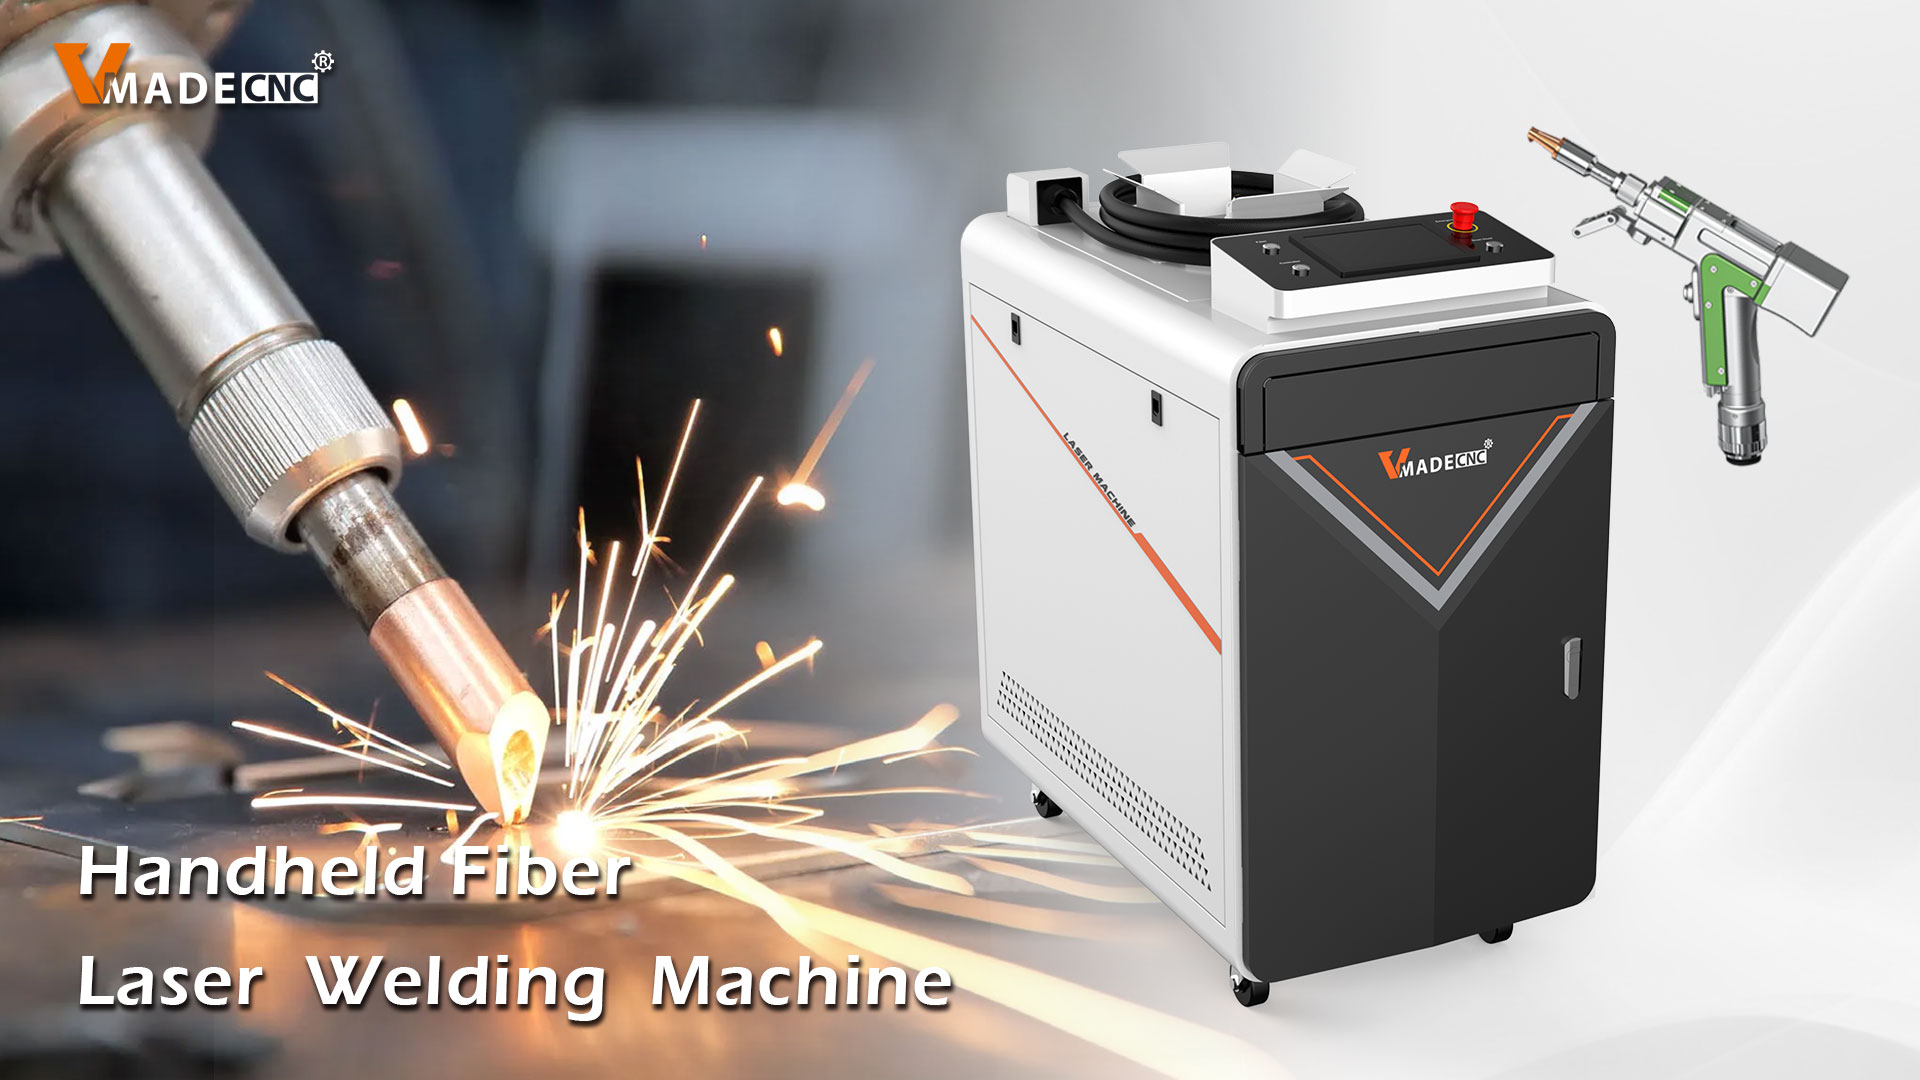 Why are more manufacturers switching to welding with fiber lasers from traditional welding techniques?cid=4